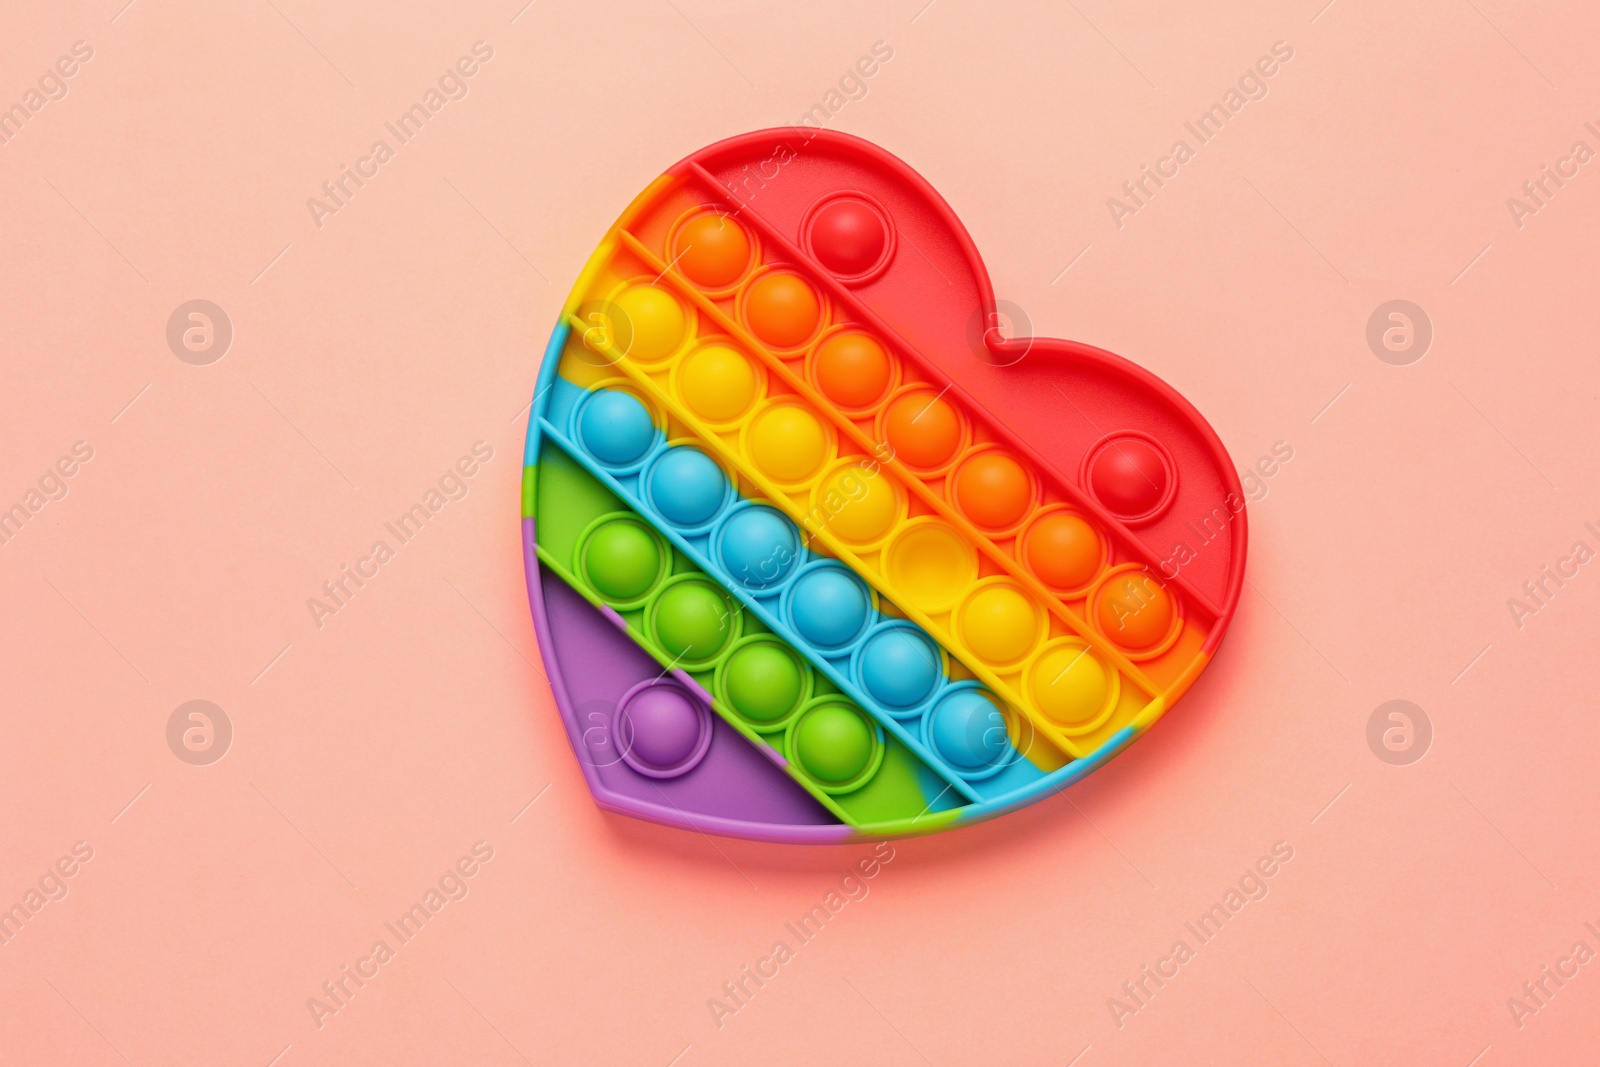 Photo of Heart shaped rainbow pop it fidget toy on pink background, top view